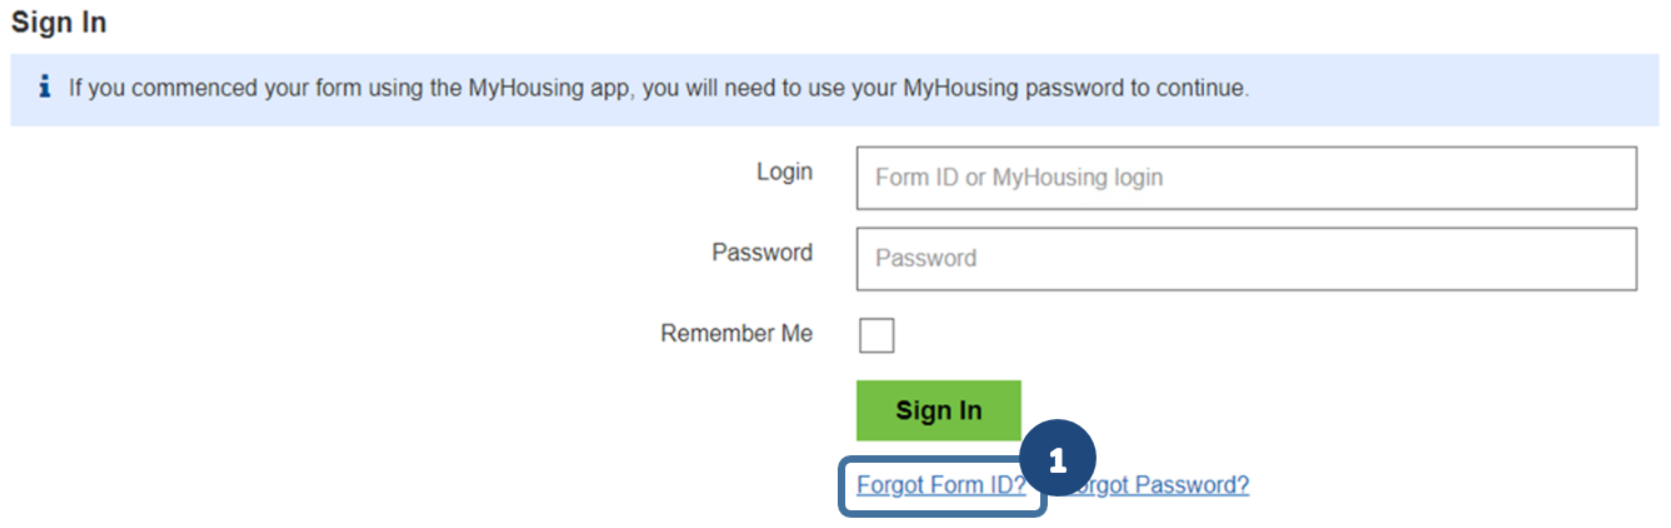 If you forget your Form ID, click Forgot Form ID? to have it sent to your email